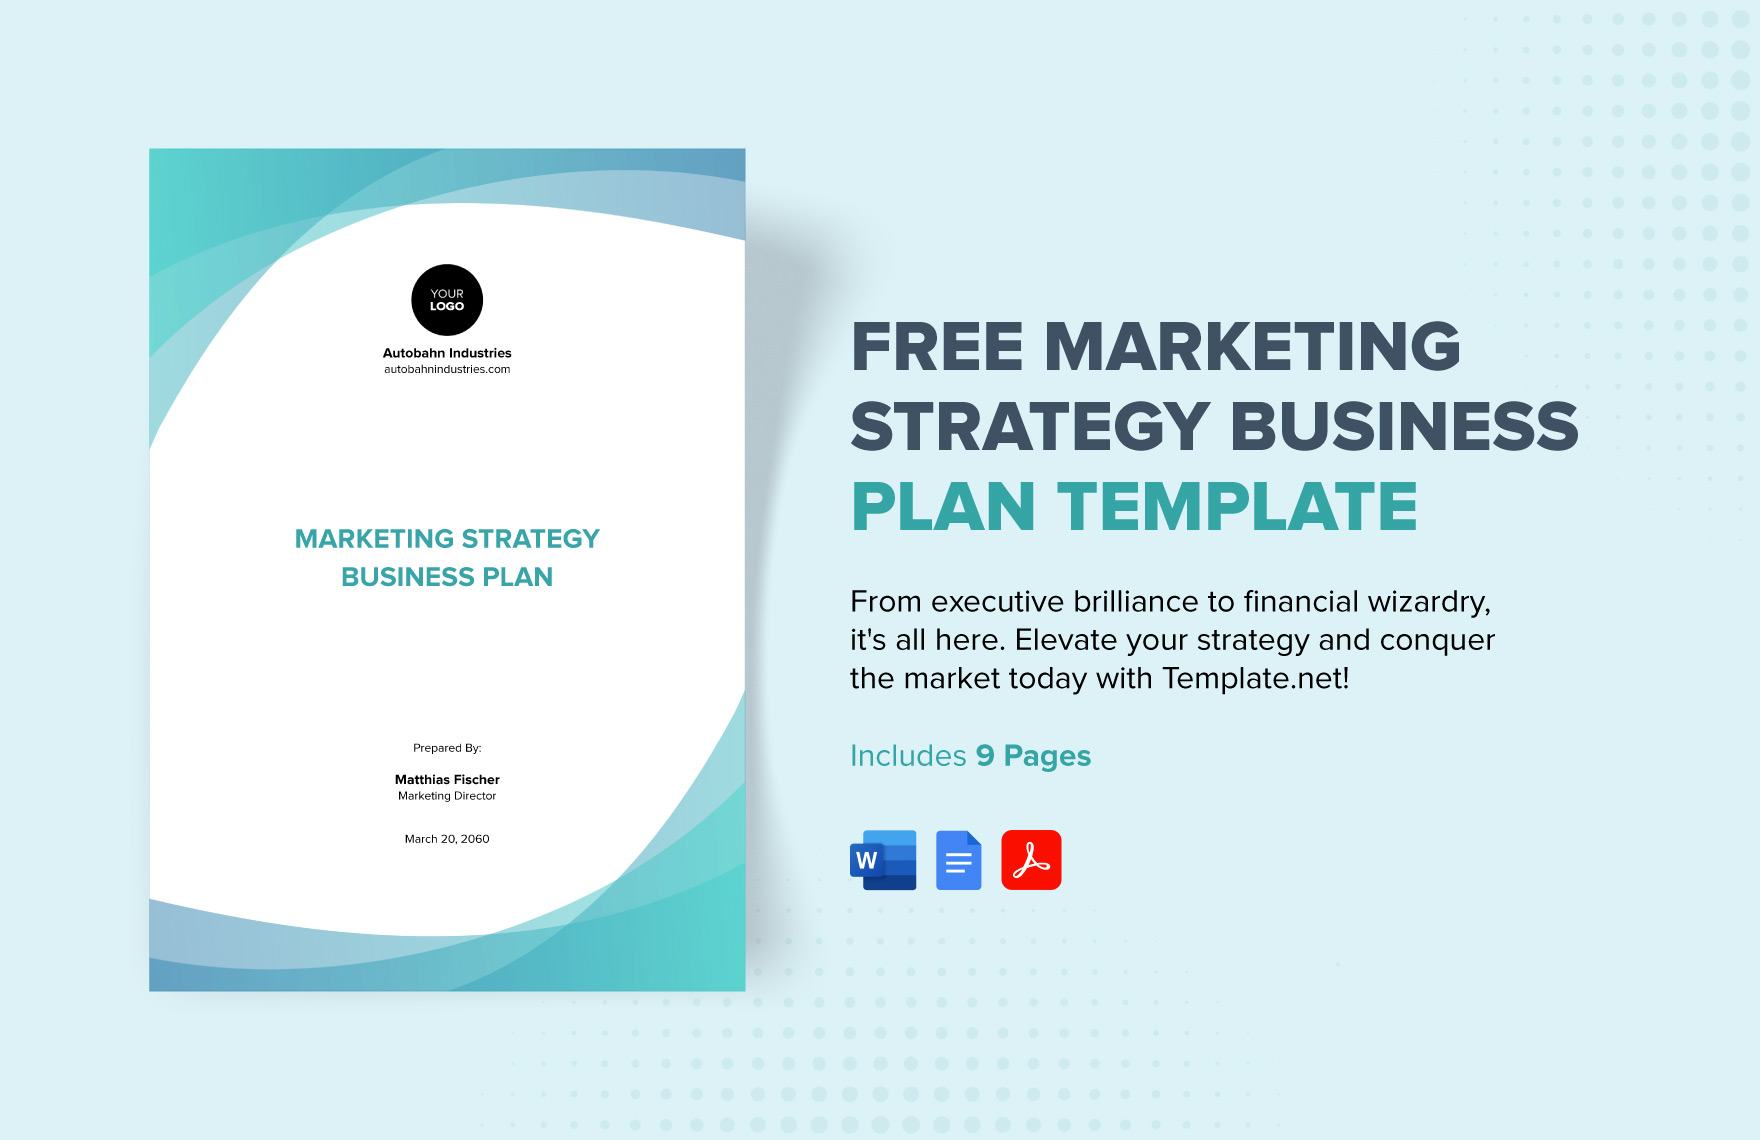 Free Marketing Strategy Business Plan Template